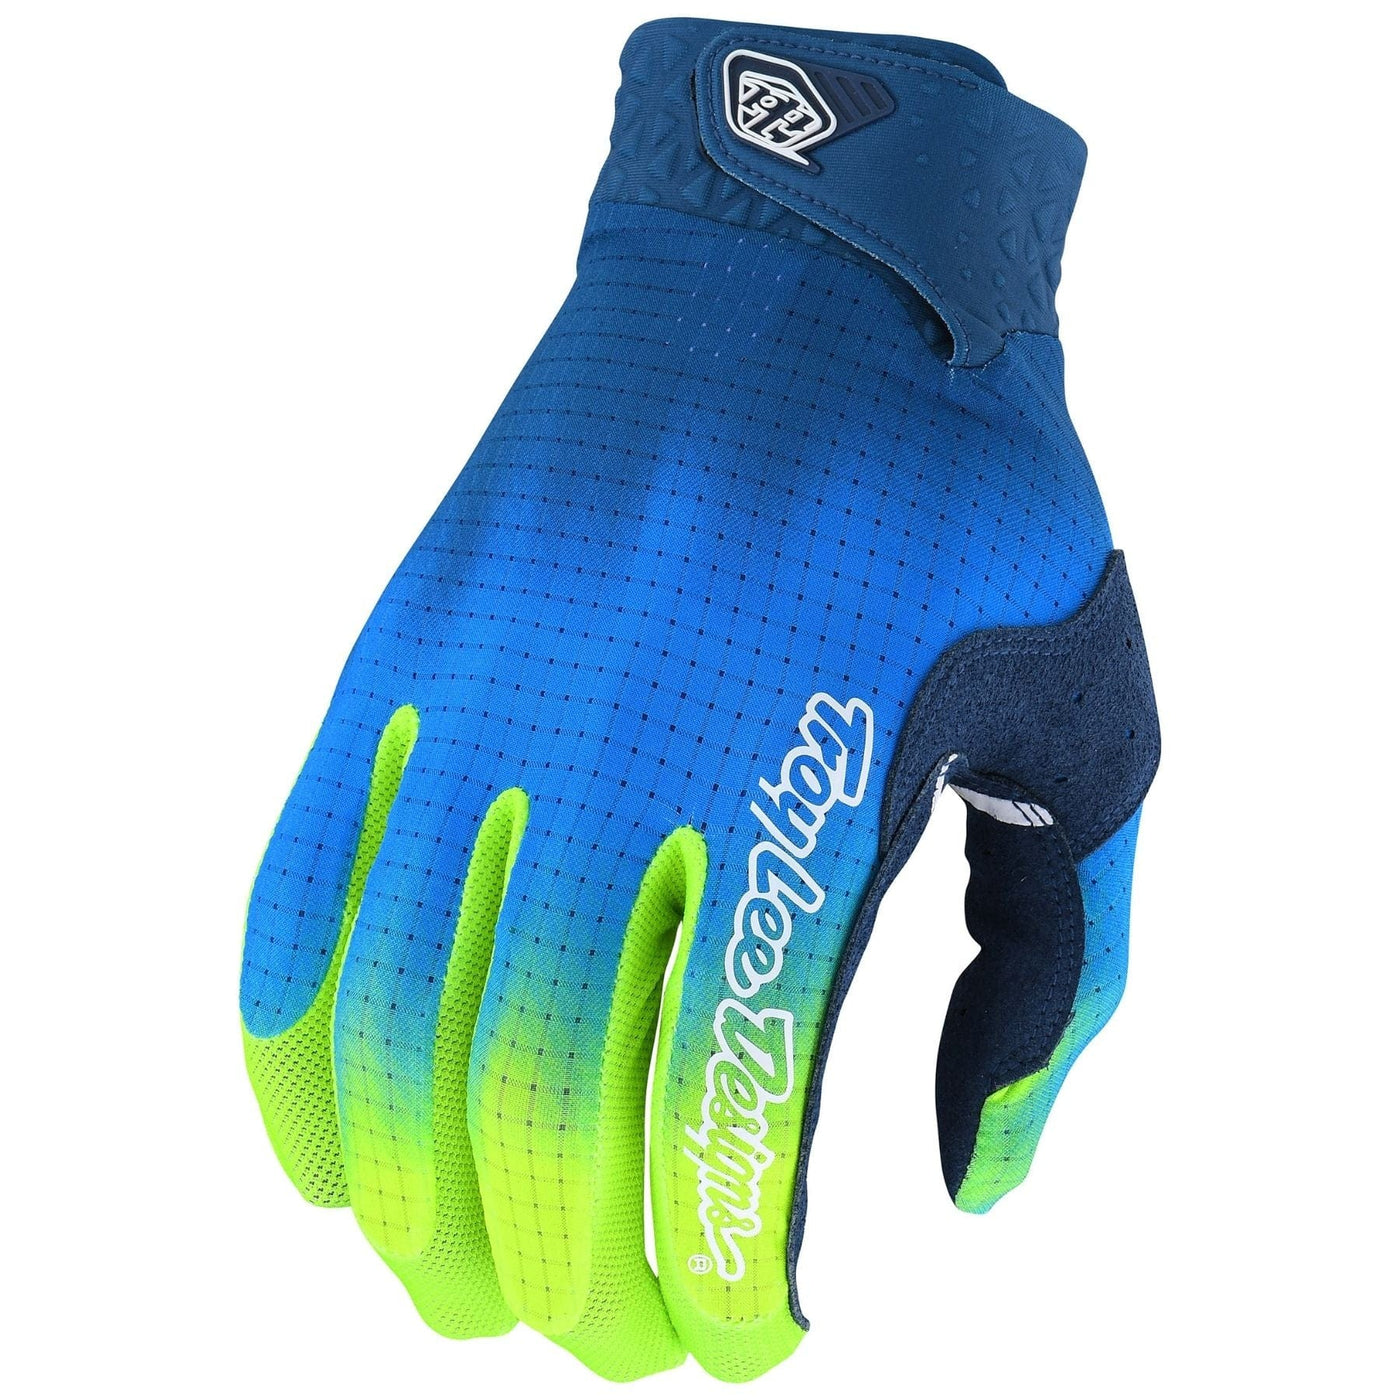 Troy Lee Designs Gloves AIR Jet Fuel - Navy/Yellow 8Lines Shop - Fast Shipping